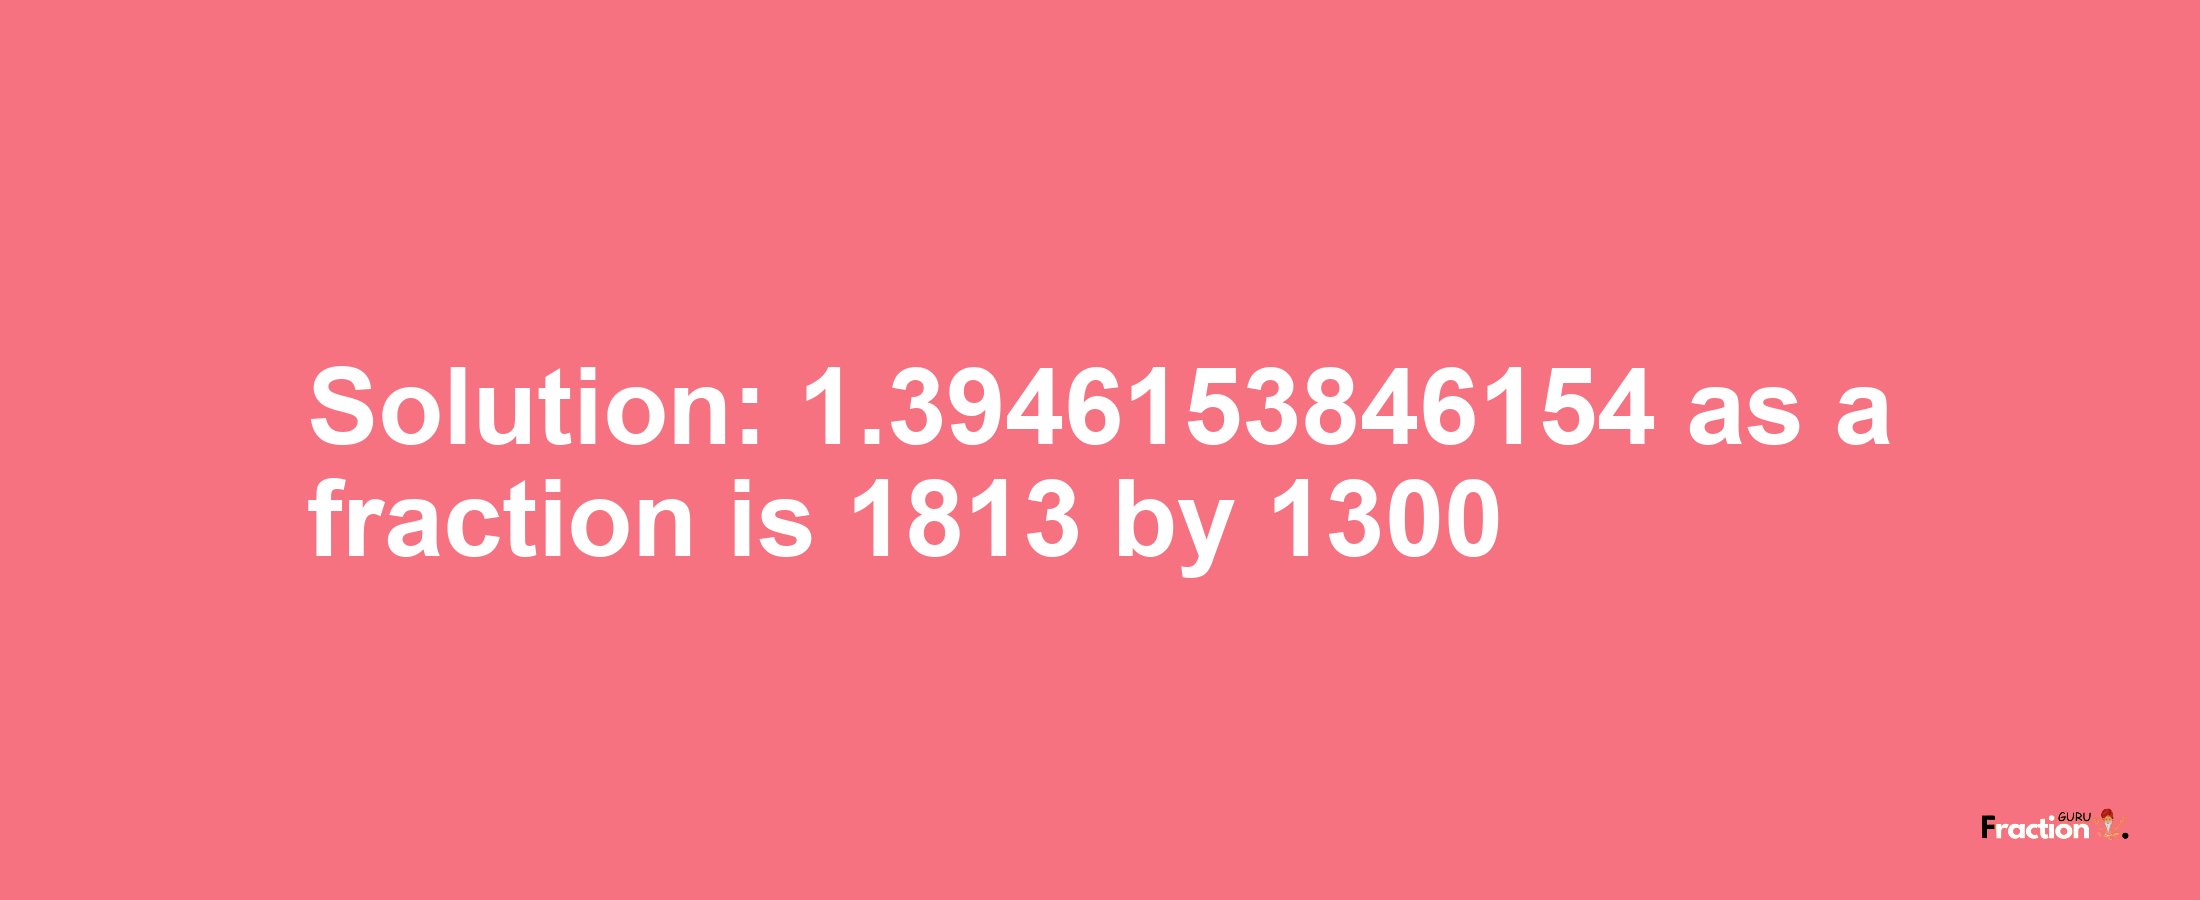 Solution:1.3946153846154 as a fraction is 1813/1300